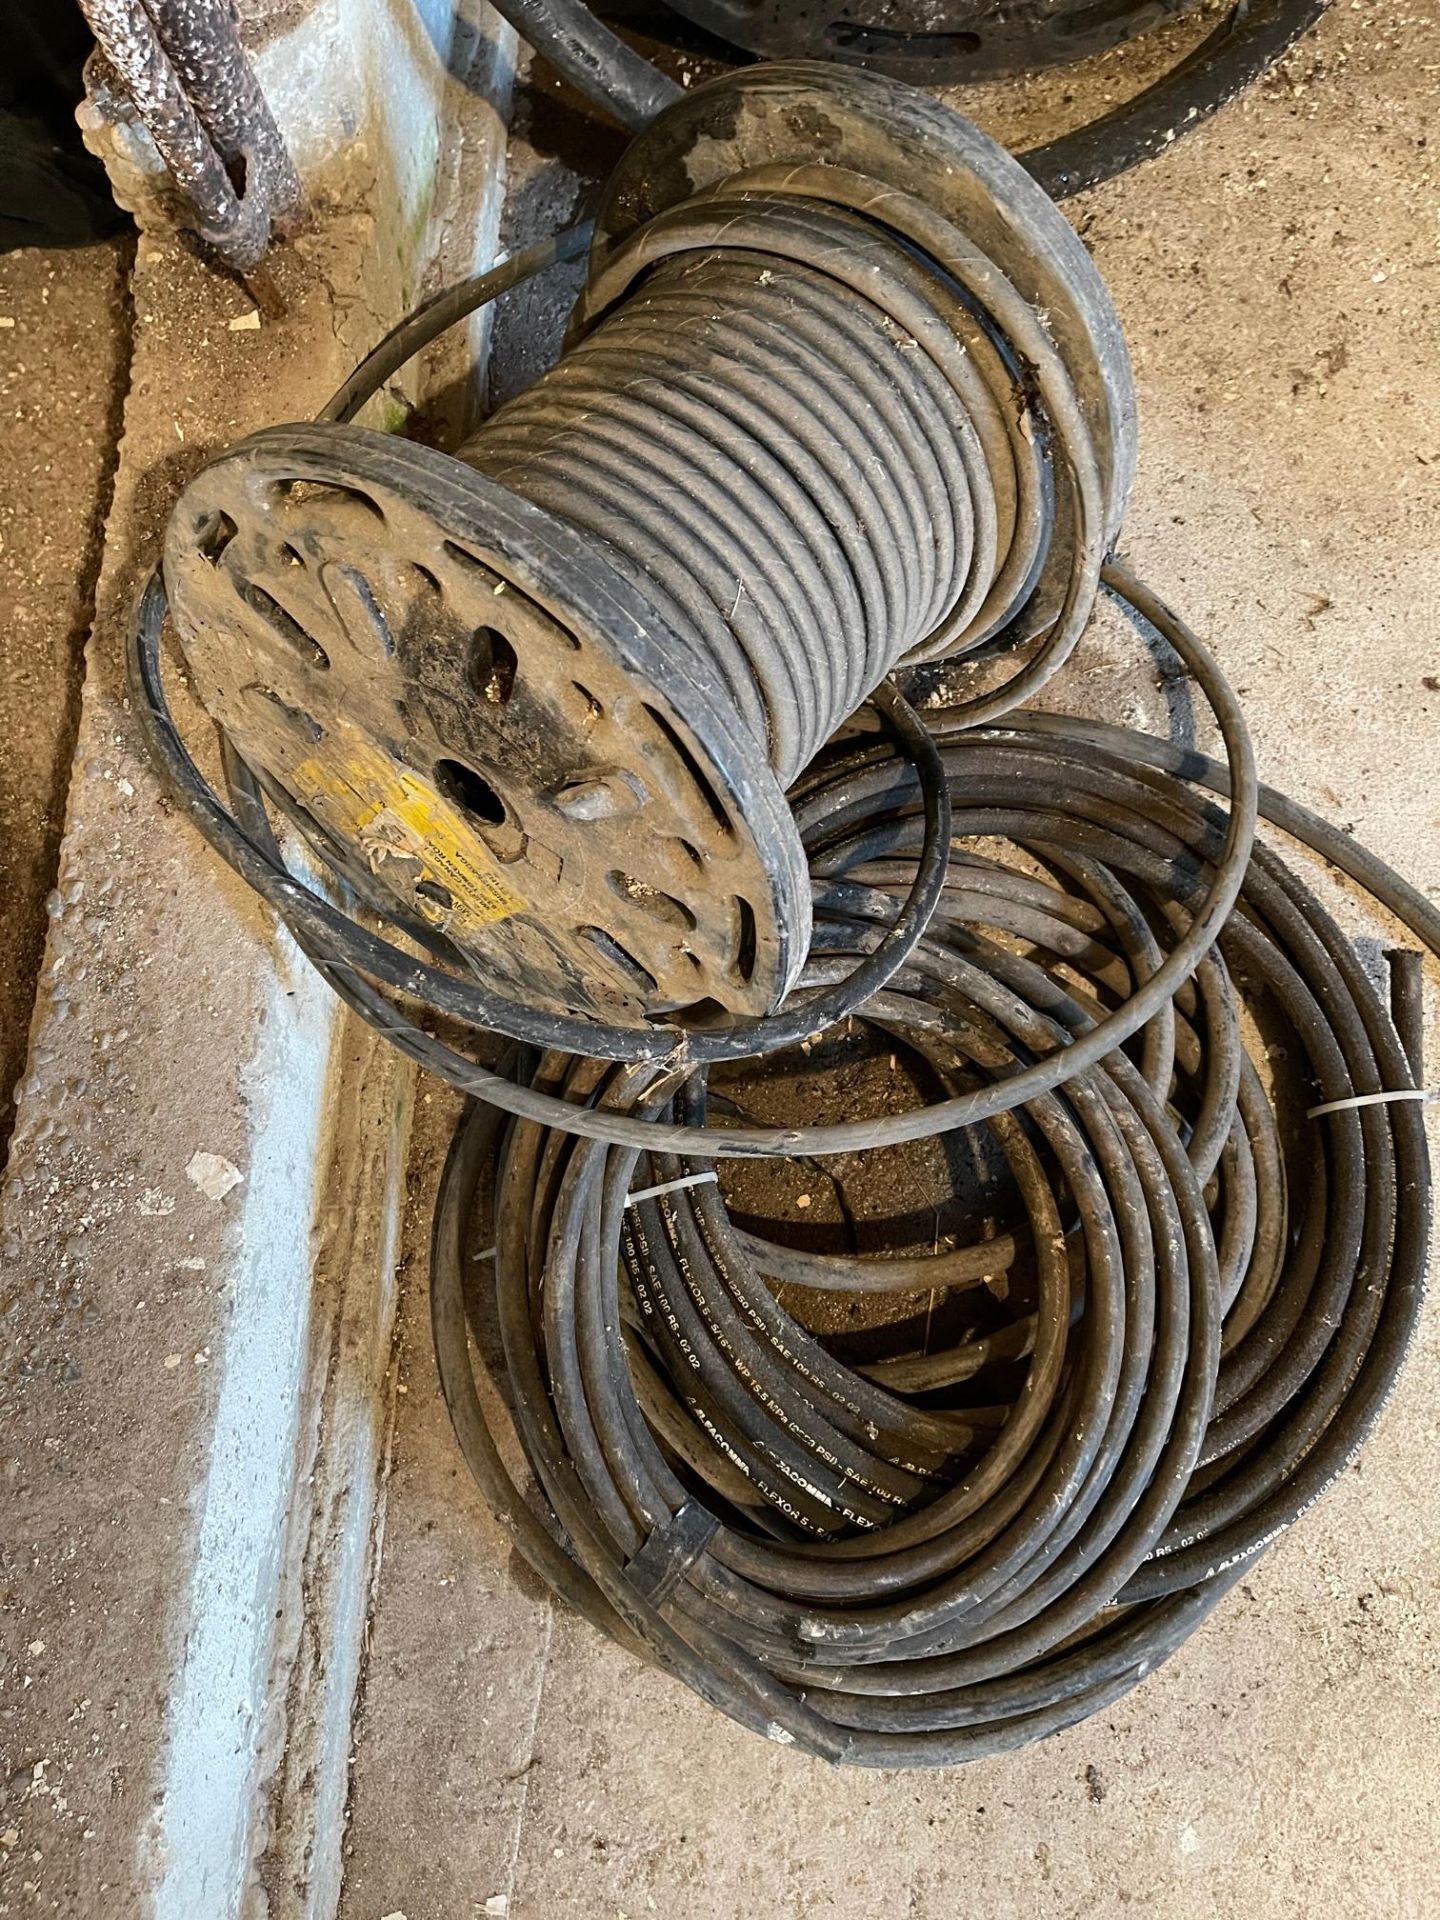 ASSORTED HYDRAULIC HOSES, 1/4 “, 5/16”, 1” AND HOT WATER 1” HOSE - Image 3 of 4